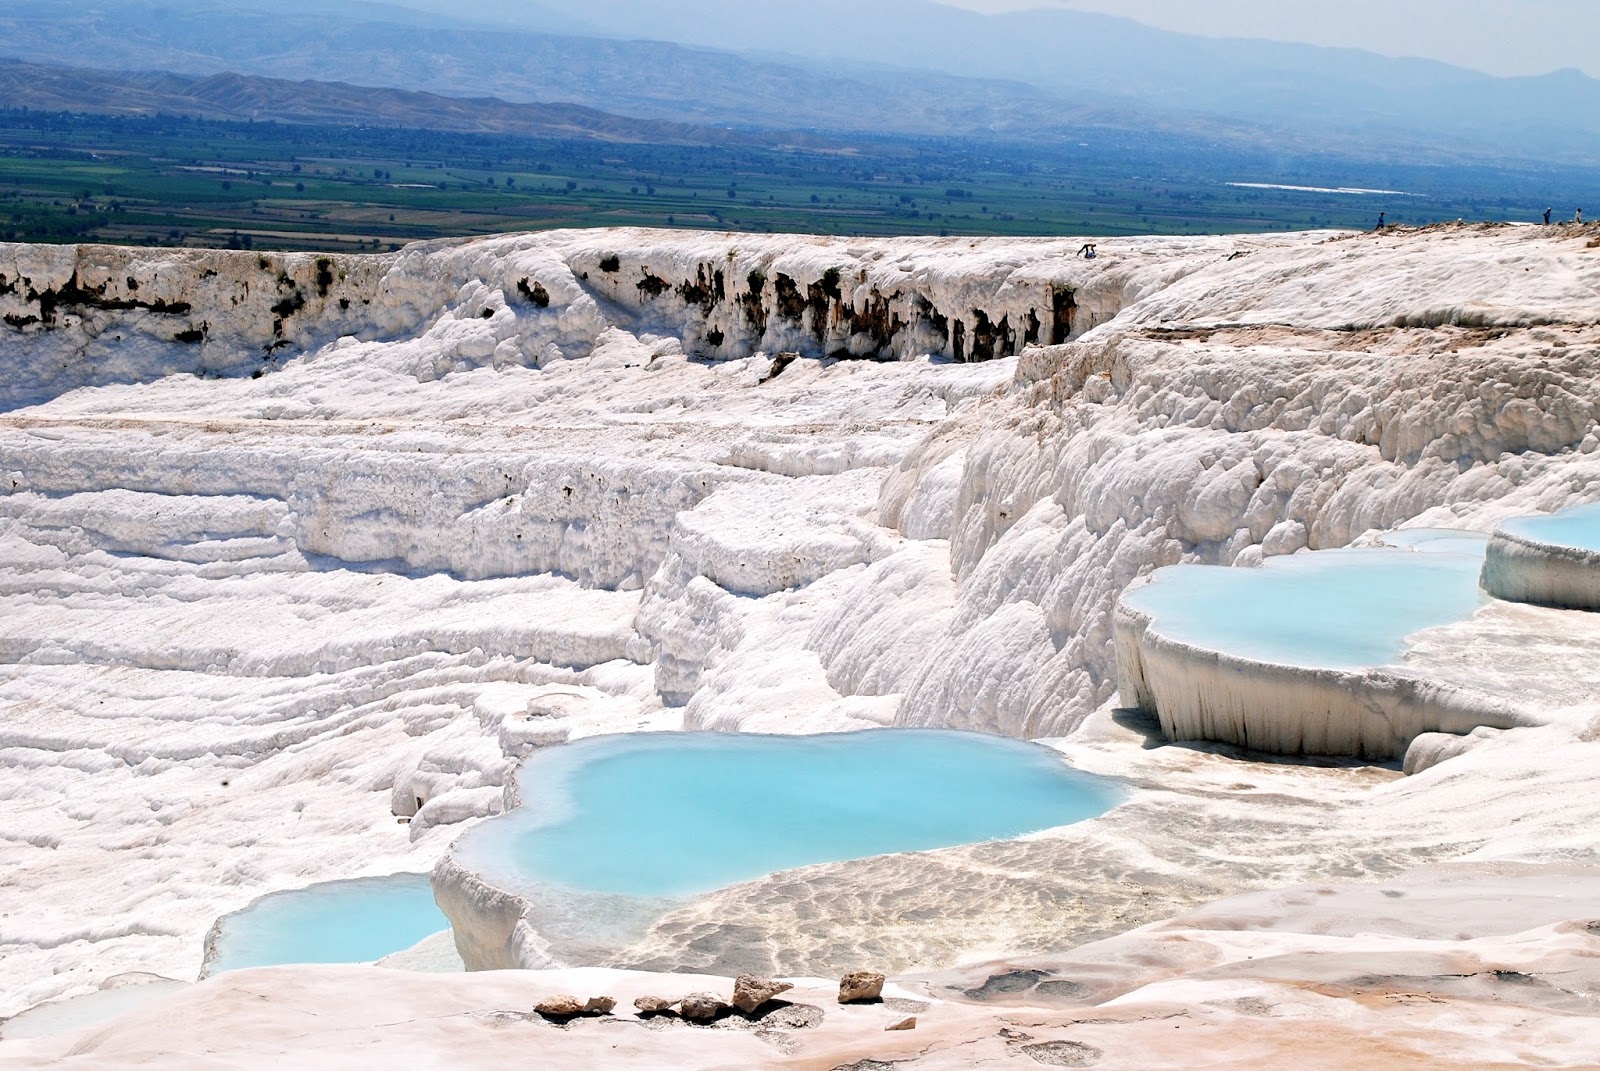 The white terrace pools at Pamukkale in Turkey